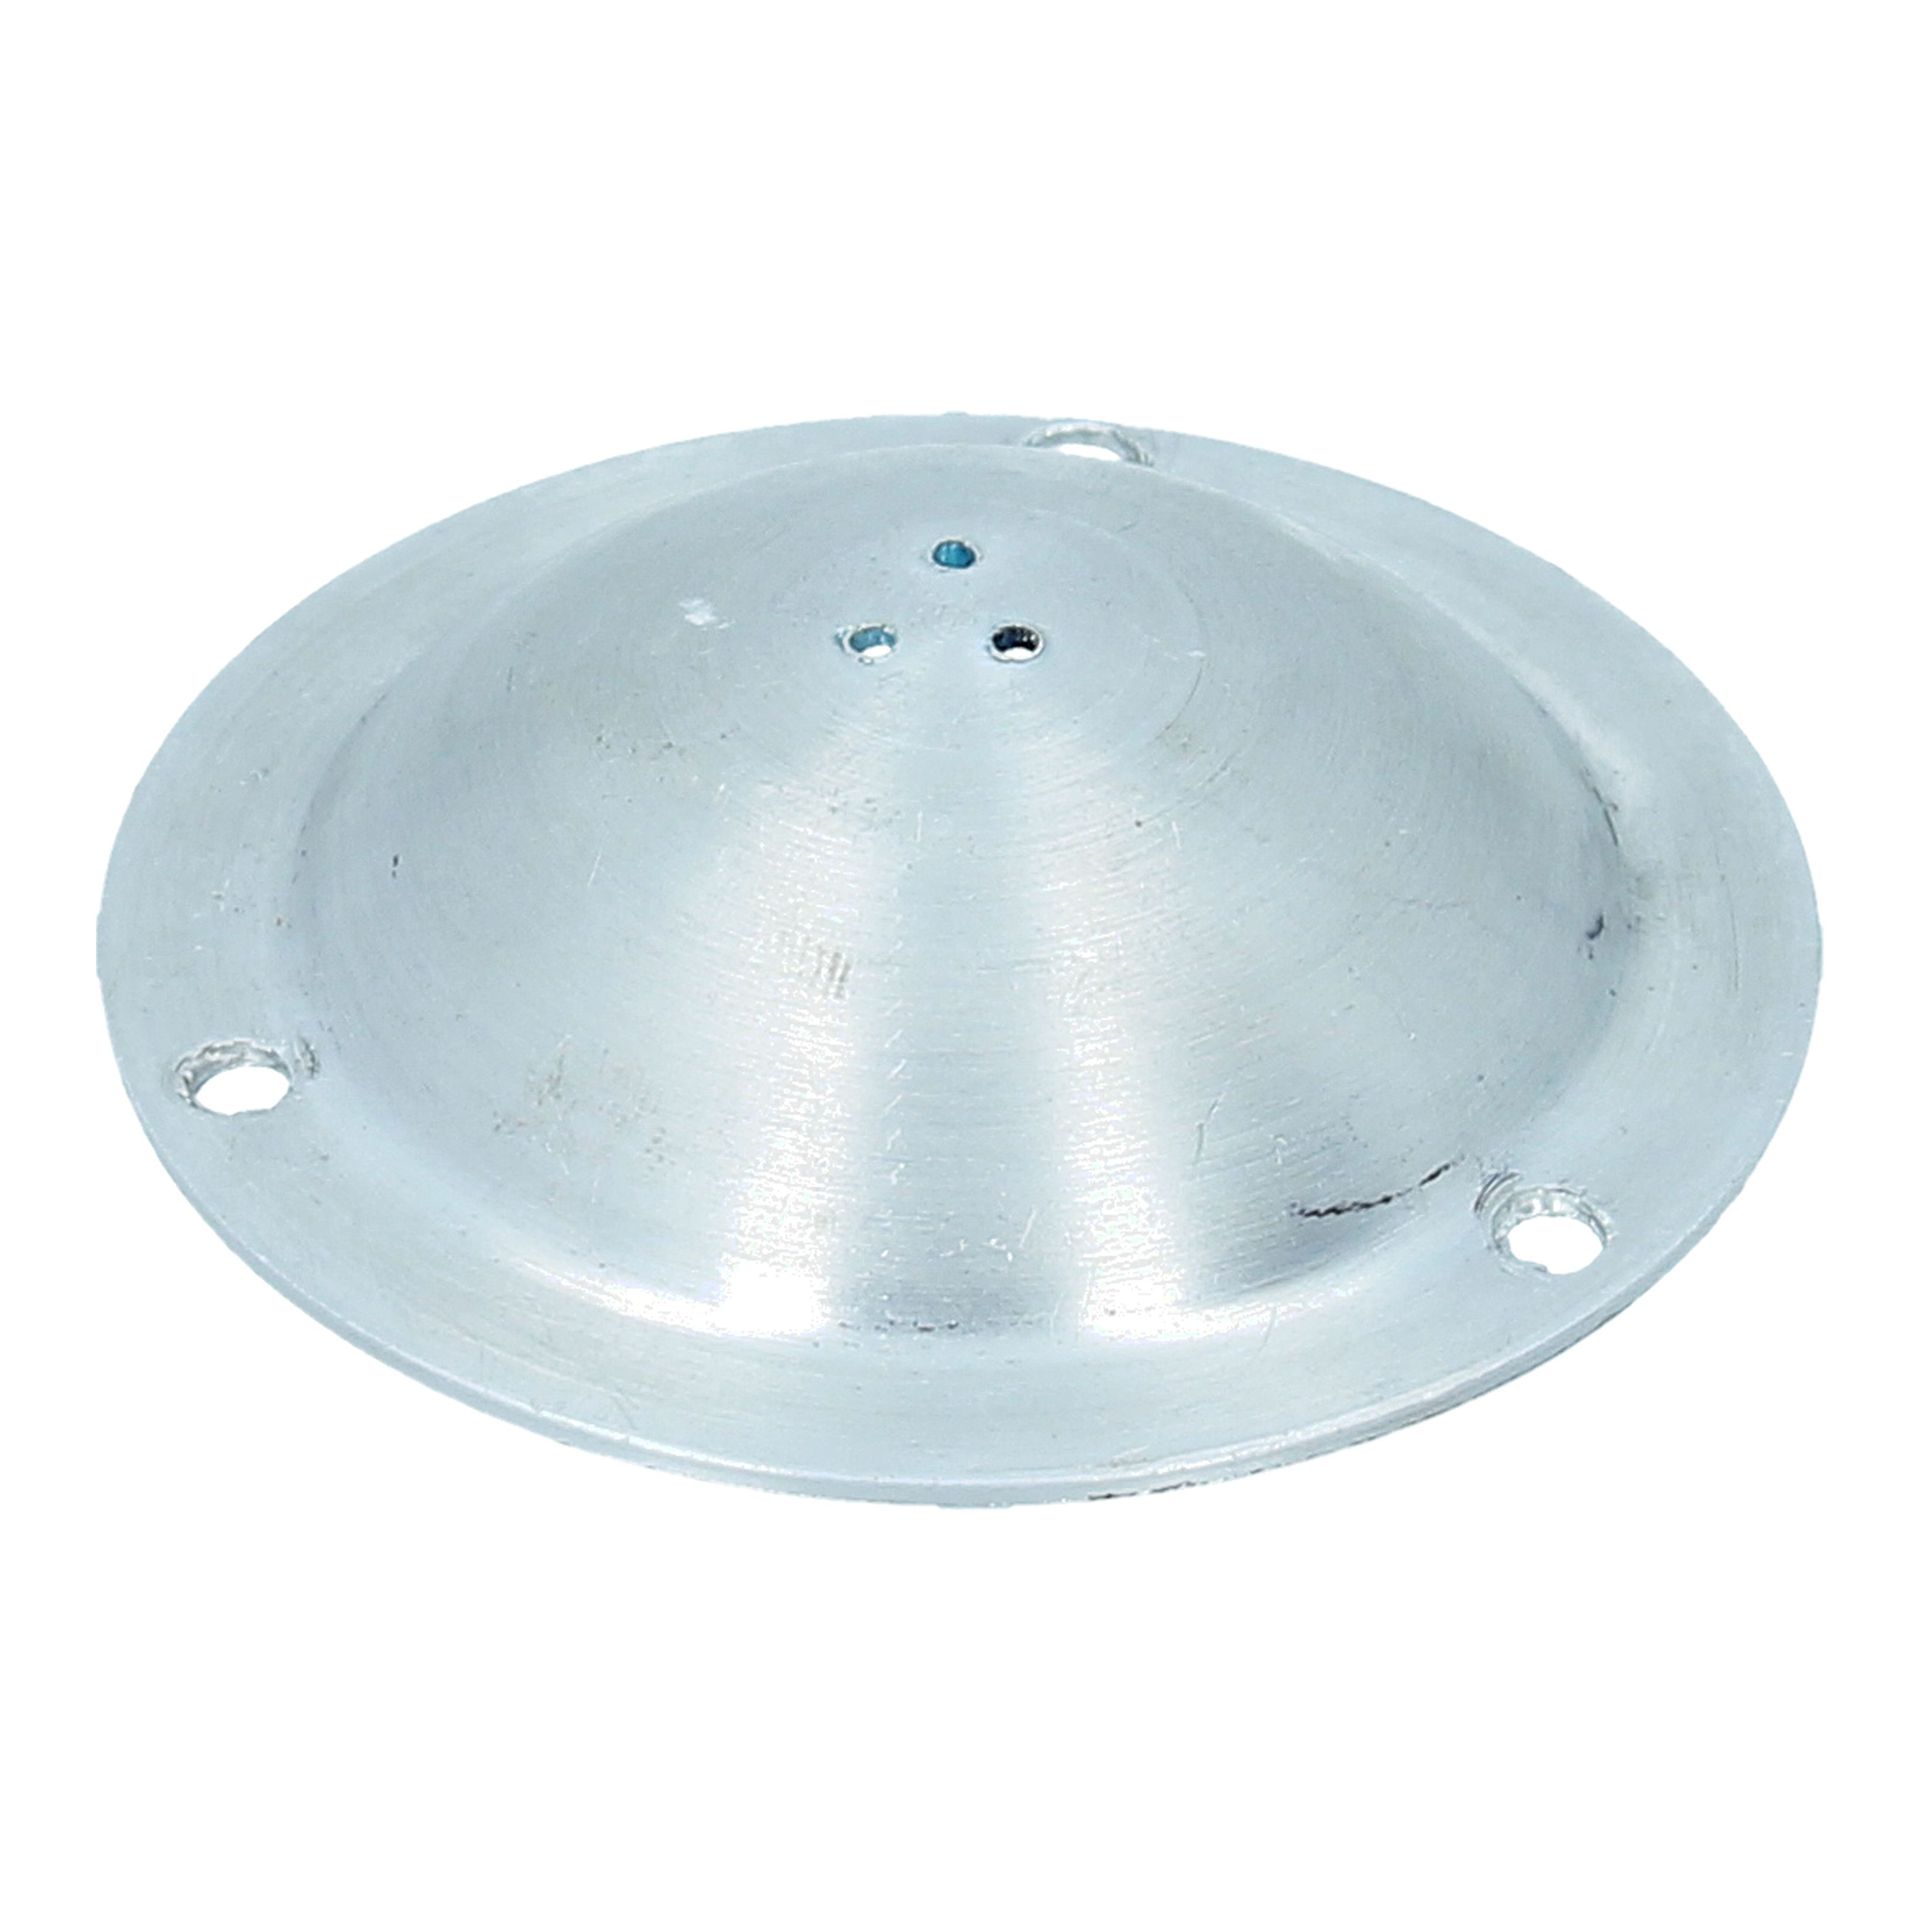 Fuel Tank Cap Spinnings Small Centre Dome 